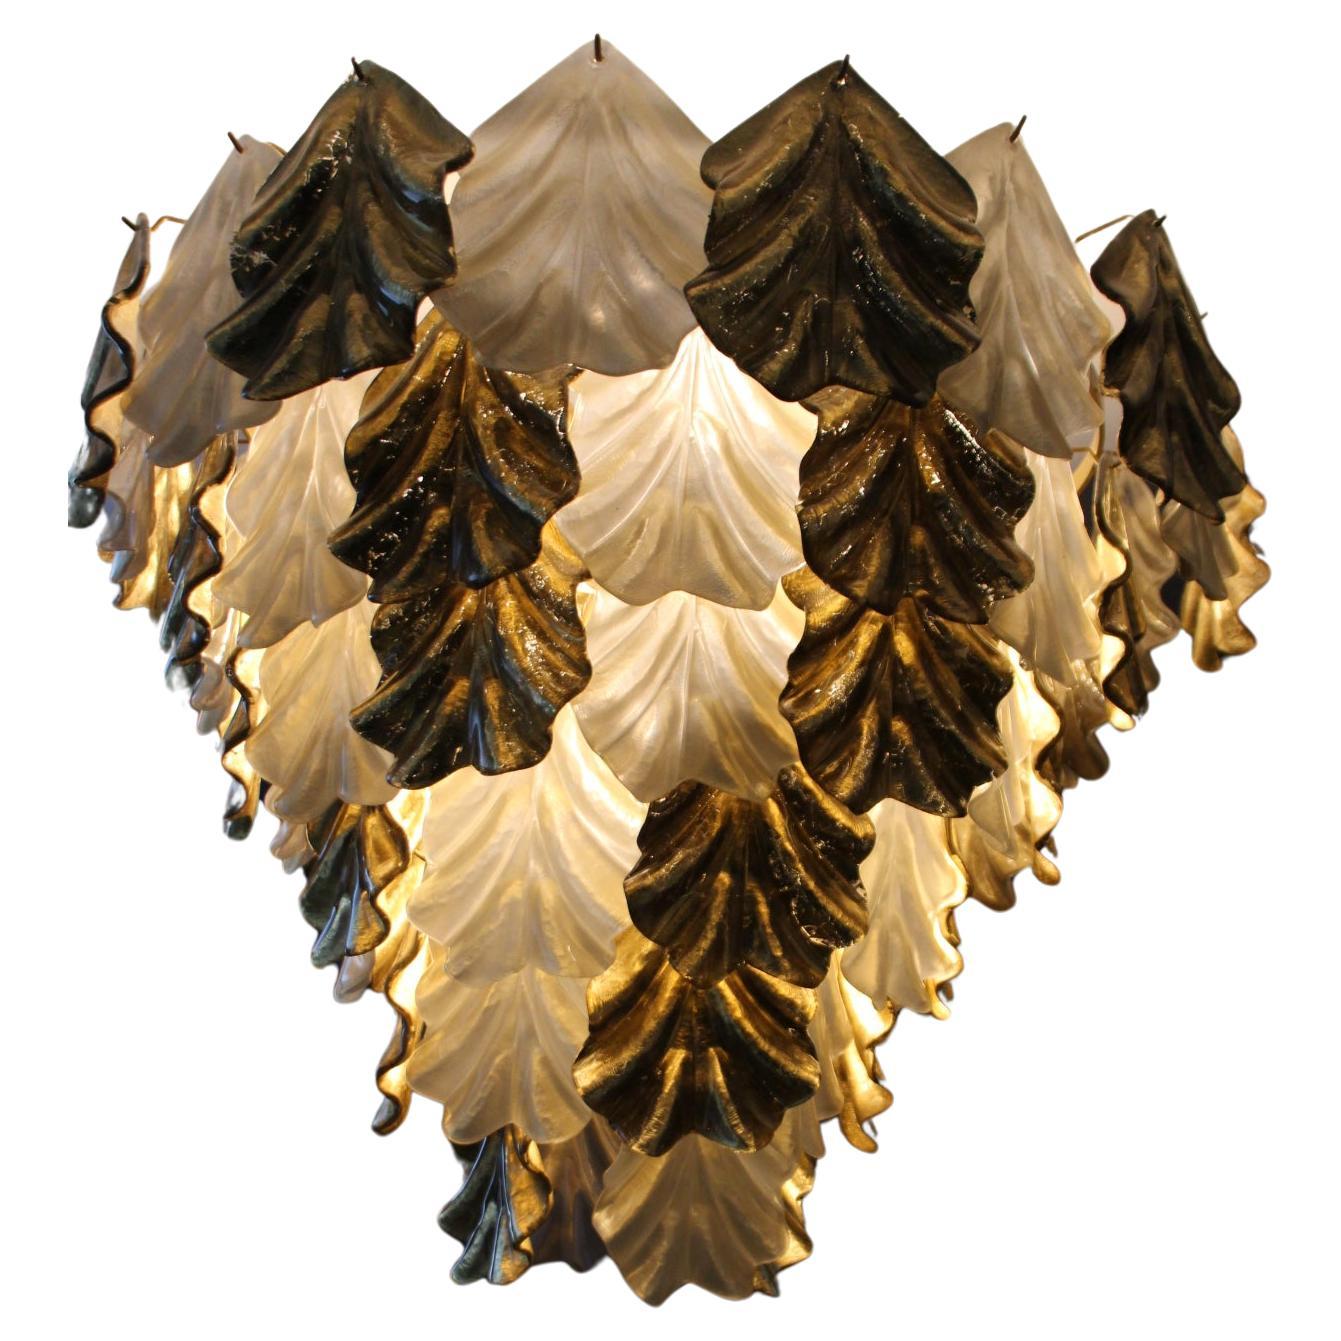 Iridescent Pearly and Golden Italian Murano Glass Chandelier In Barovier Style